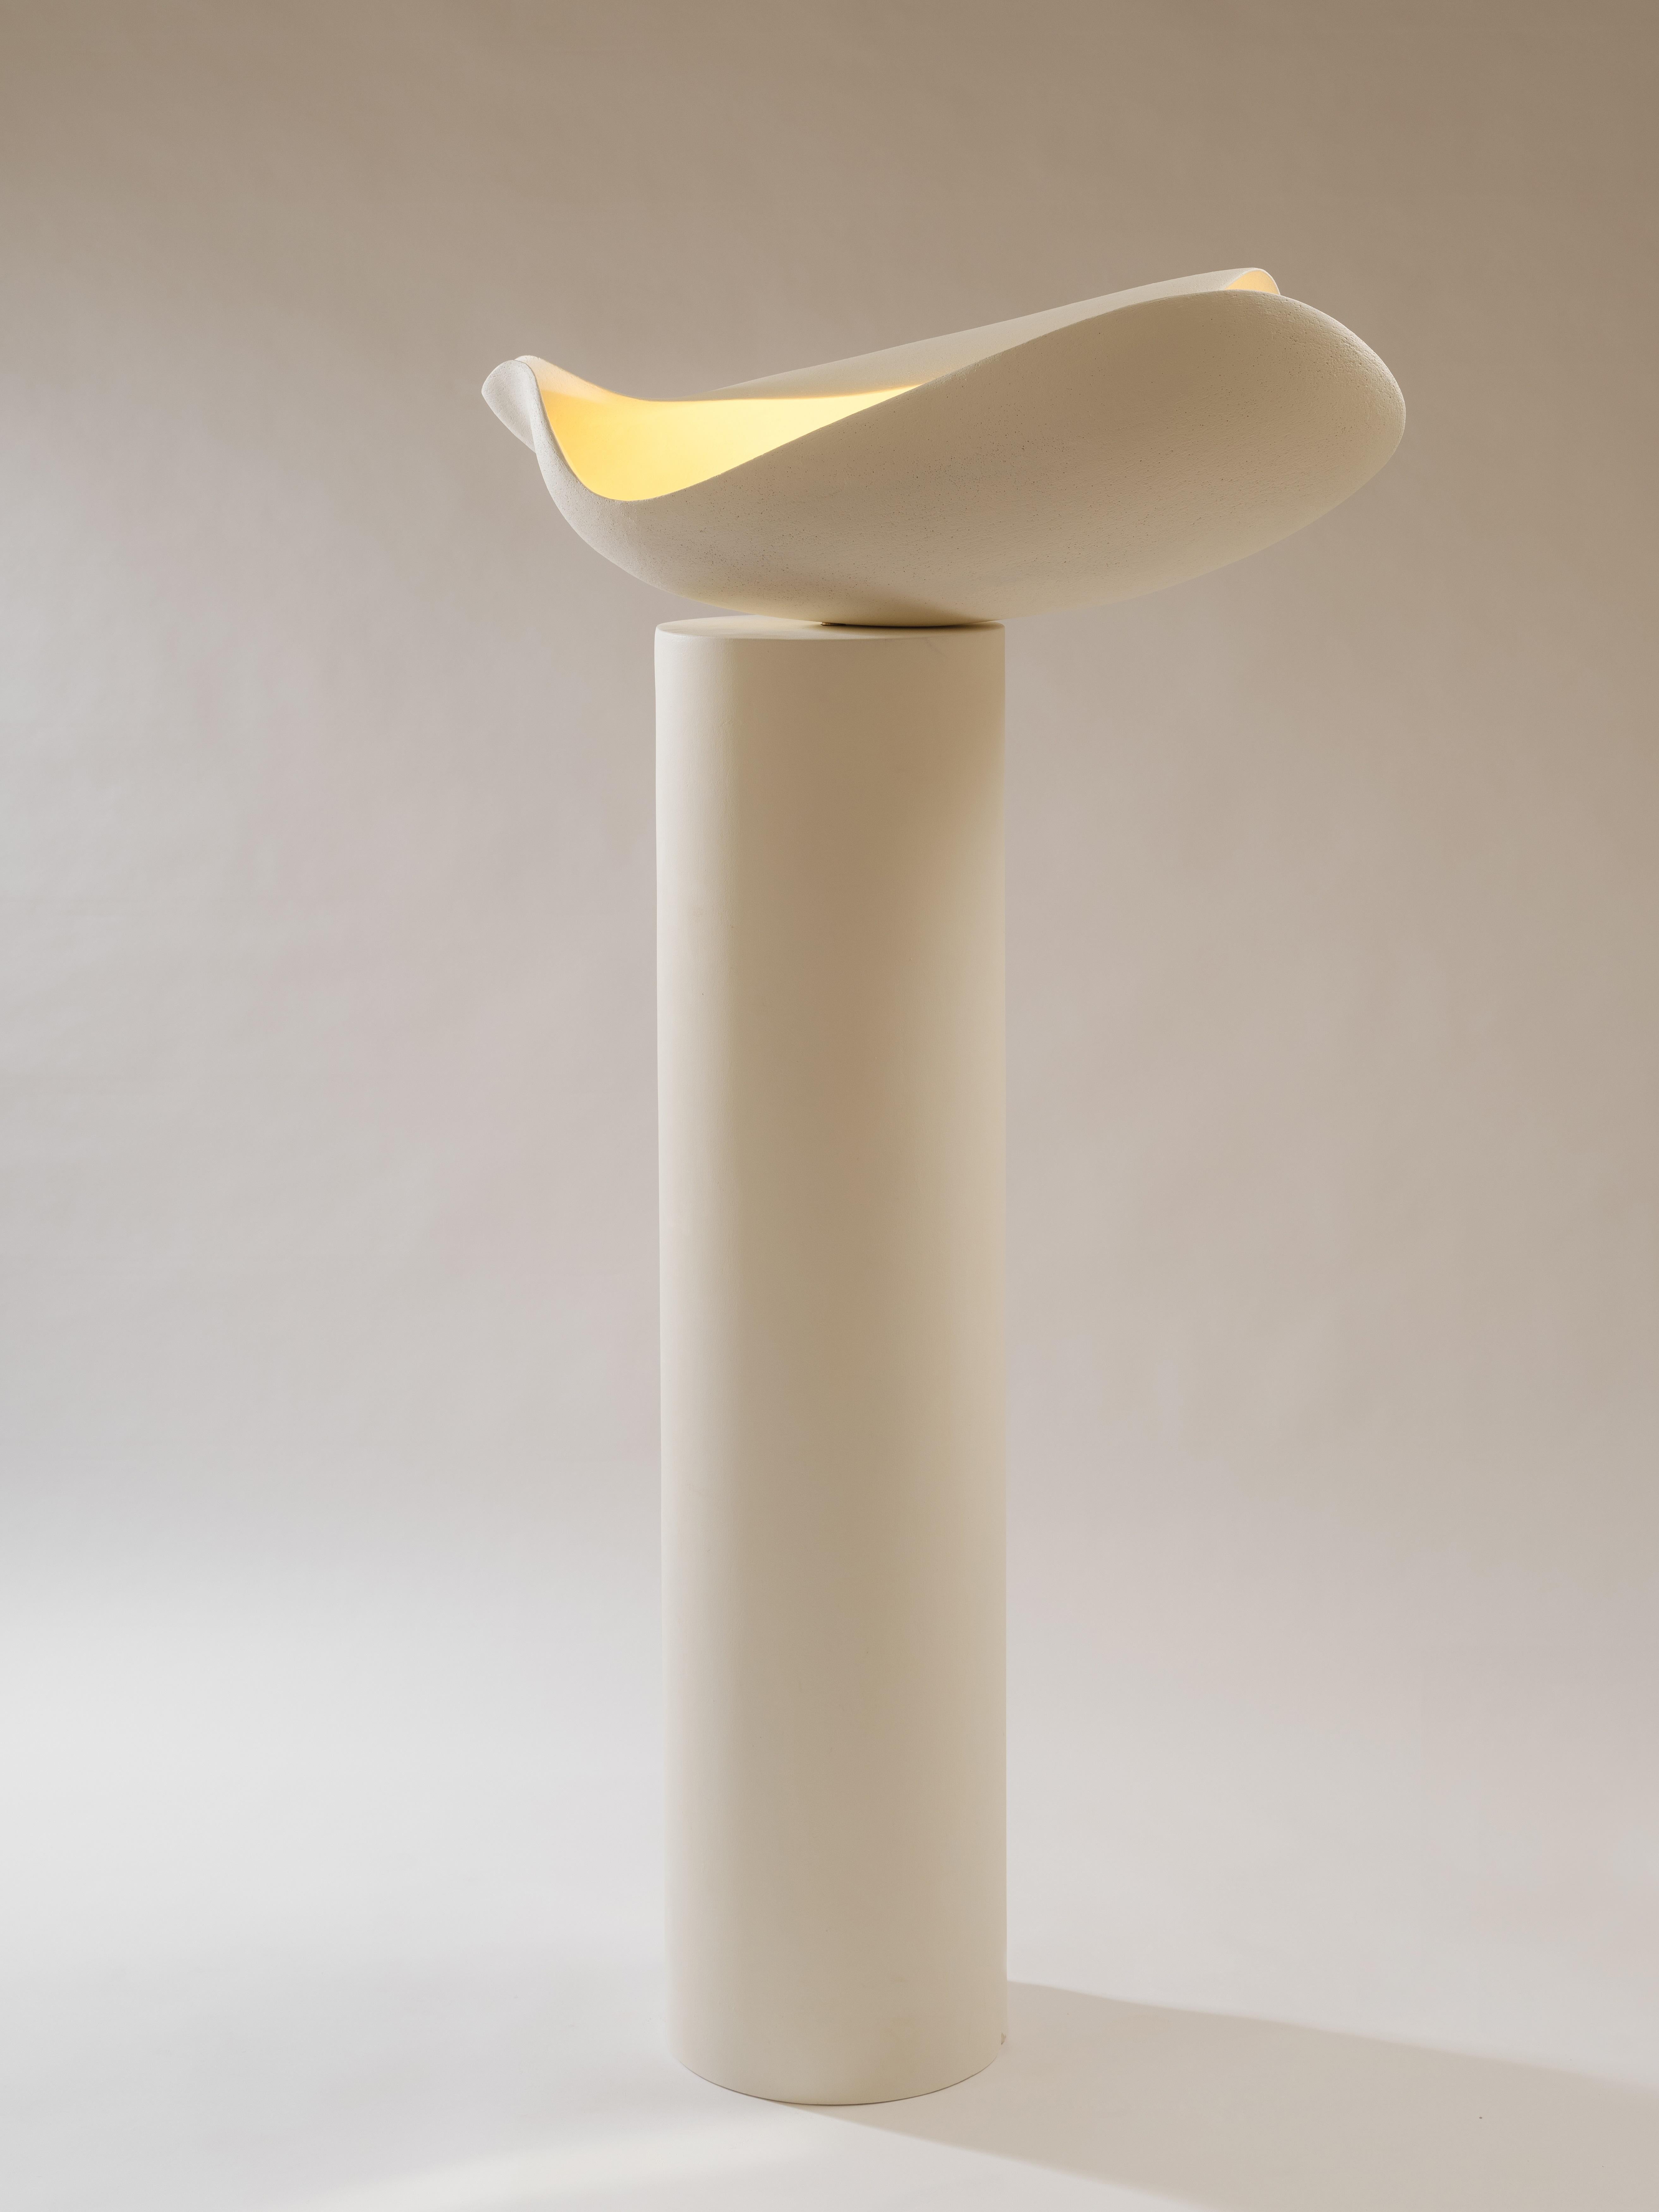 Nautile I floor lamp by Elsa Foulon
Dimensions: D 80 x H 160 cm.
Materials: Ceramic, plaster.
Also available in other dimensions.

All our lamps can be wired according to each country. If sold to the USA it will be wired for the USA for